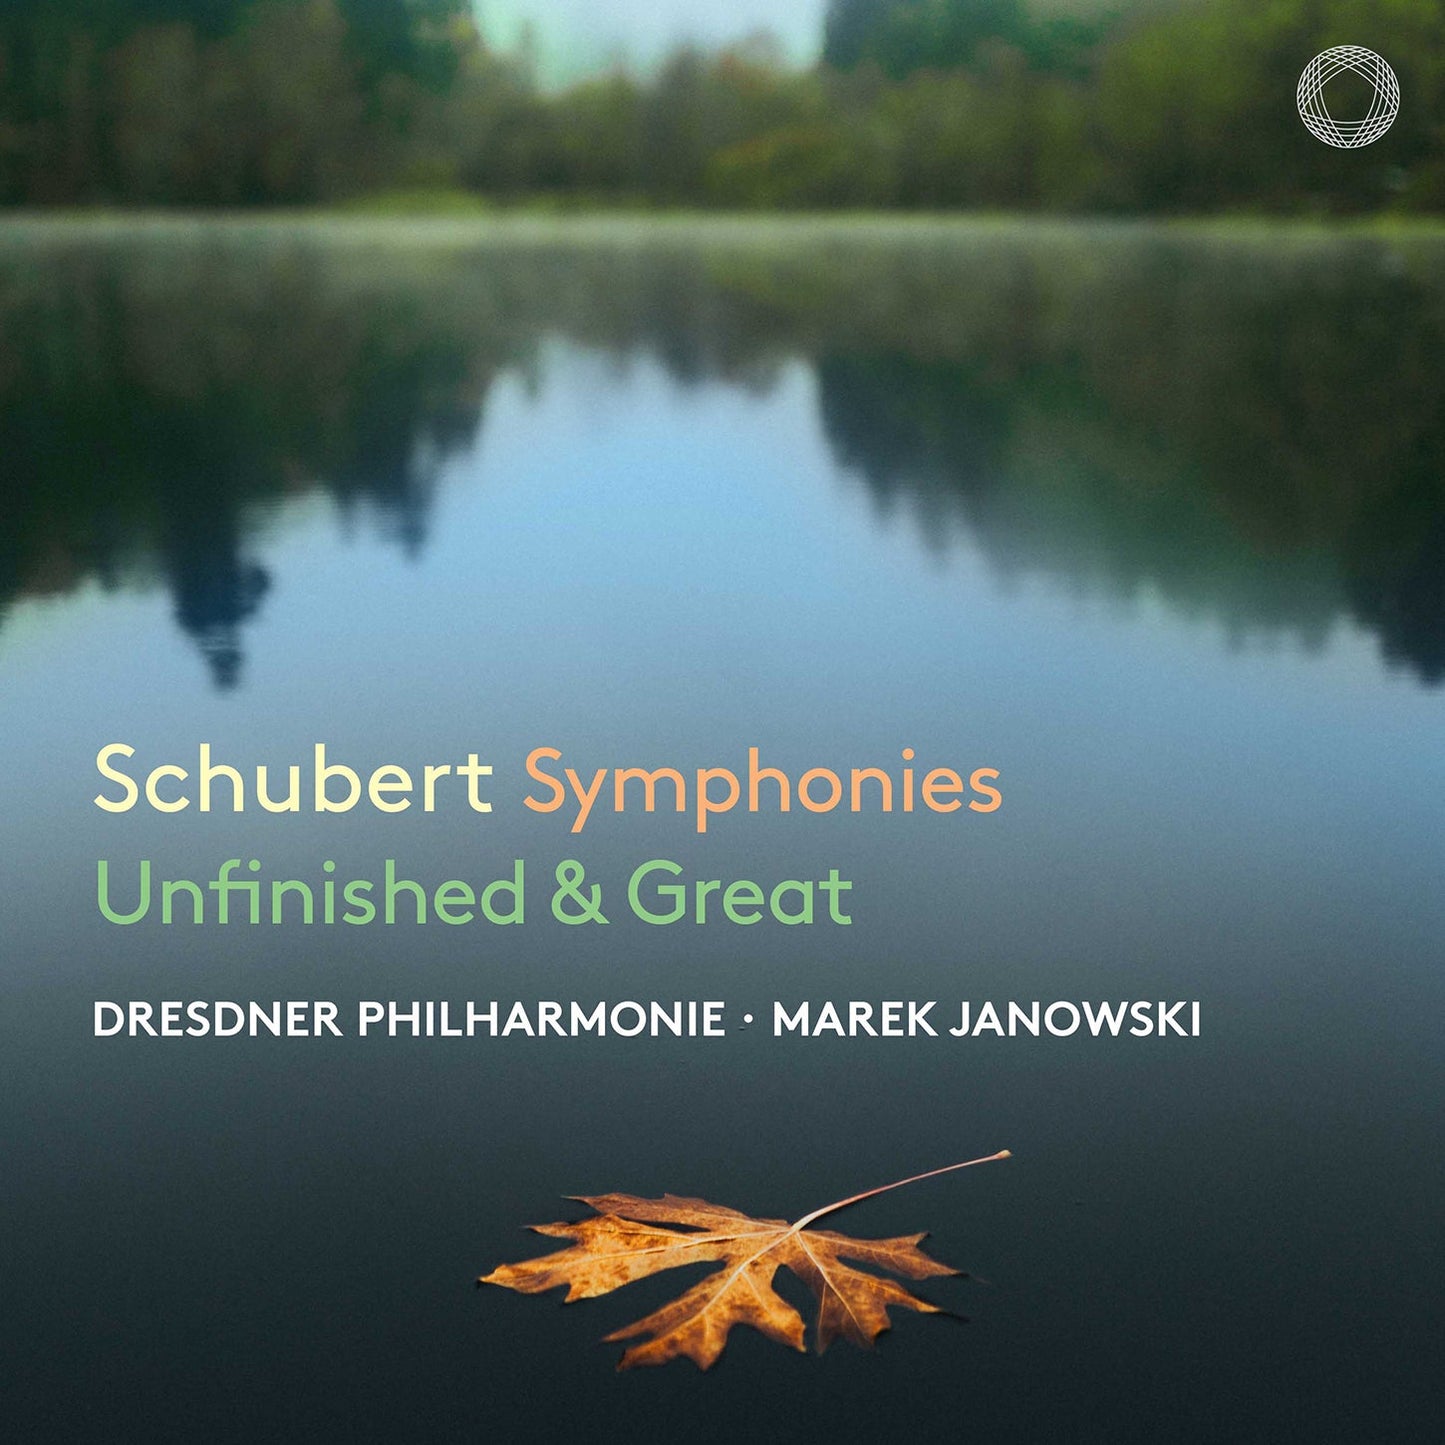 Schubert: Symphonies Unfinished & Great